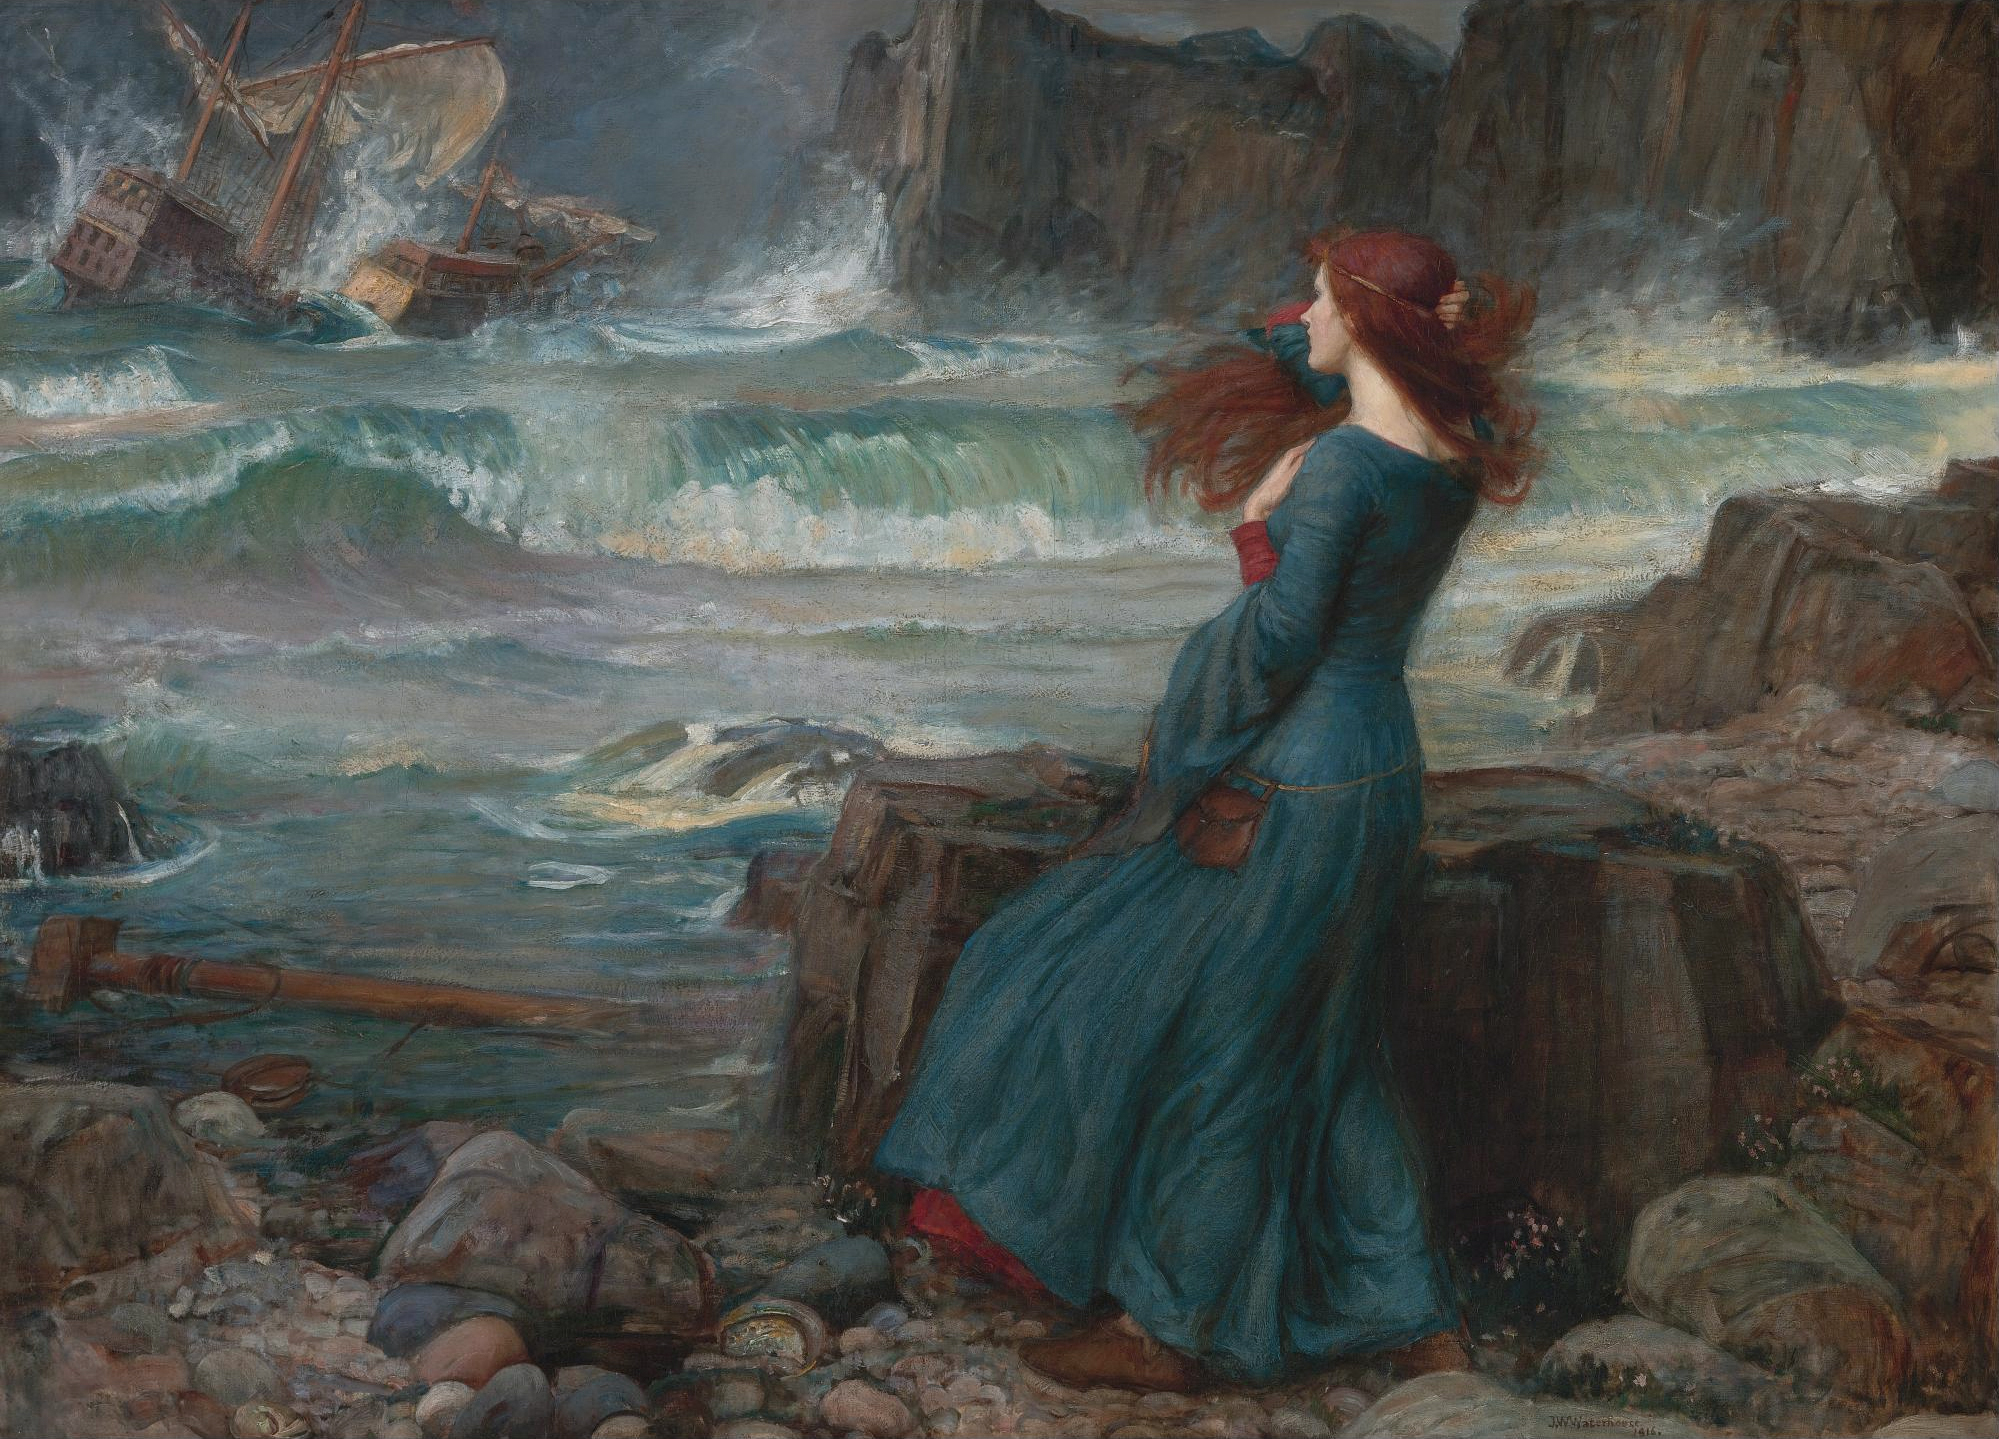 A woman sits on a rock and stares out towards a turbulent body of water.